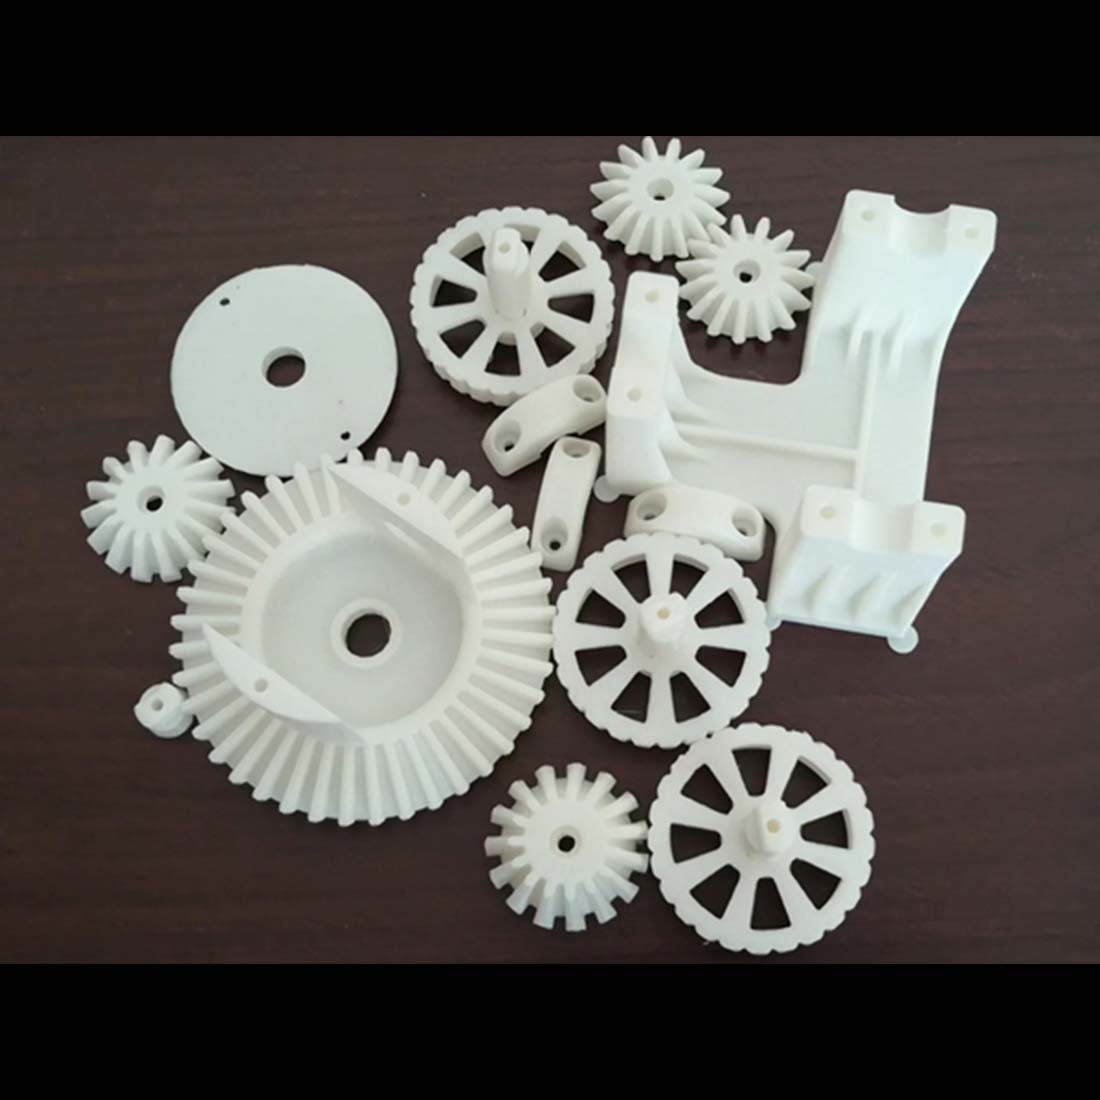 Functional 3D Printed Open Differential Model